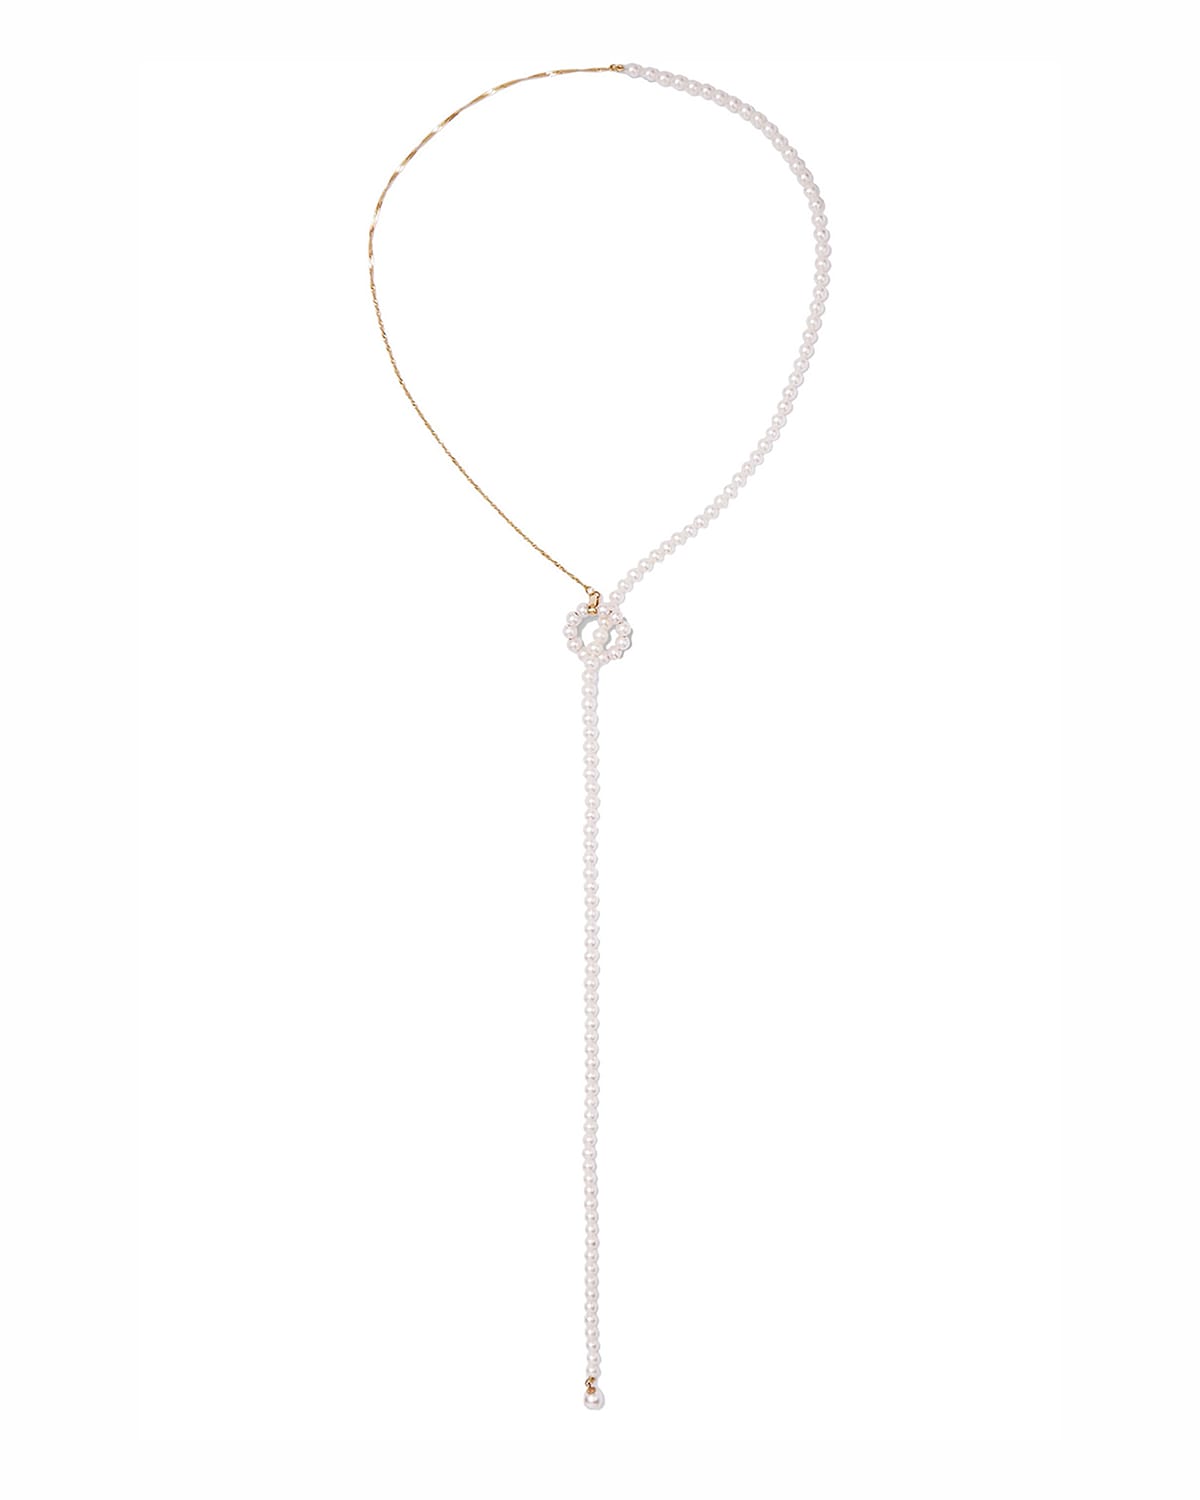 Poppy Finch 14k Gold Pearl Lariat Chain Necklace